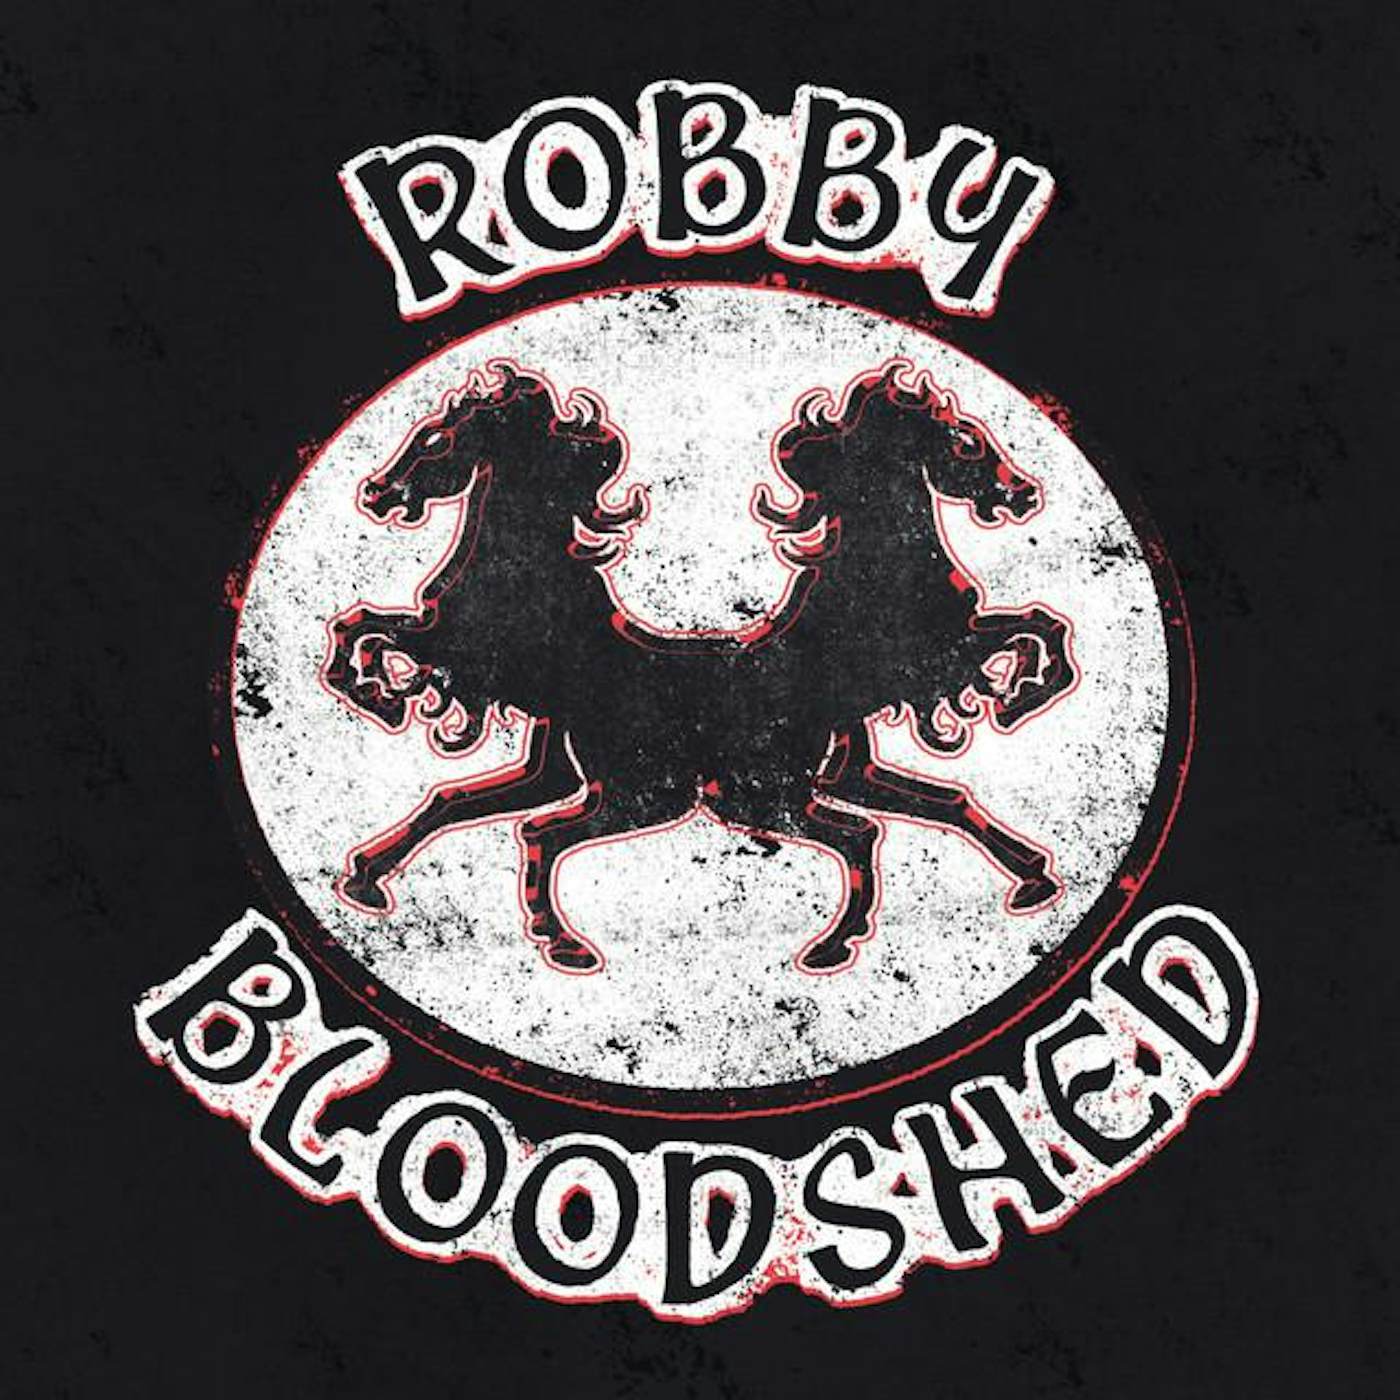 Robby Bloodshed